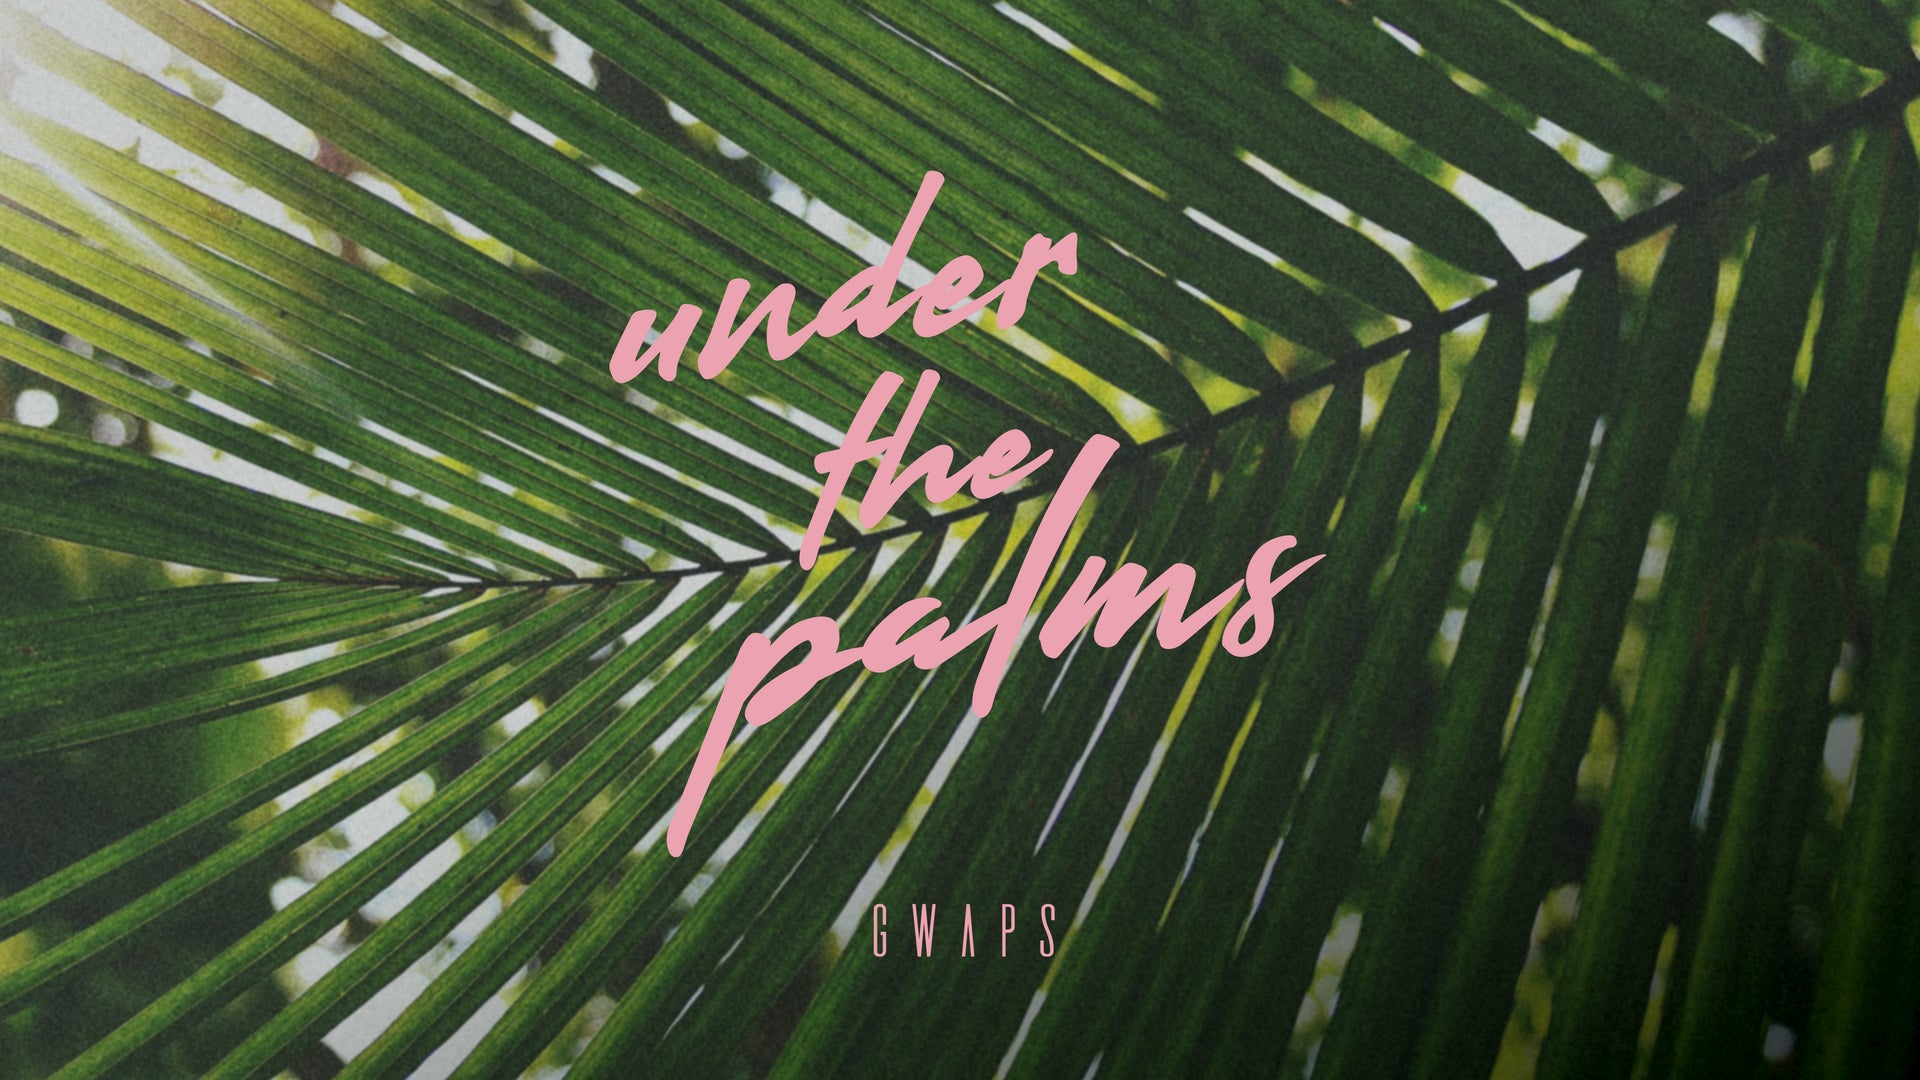 Load video: under the palms